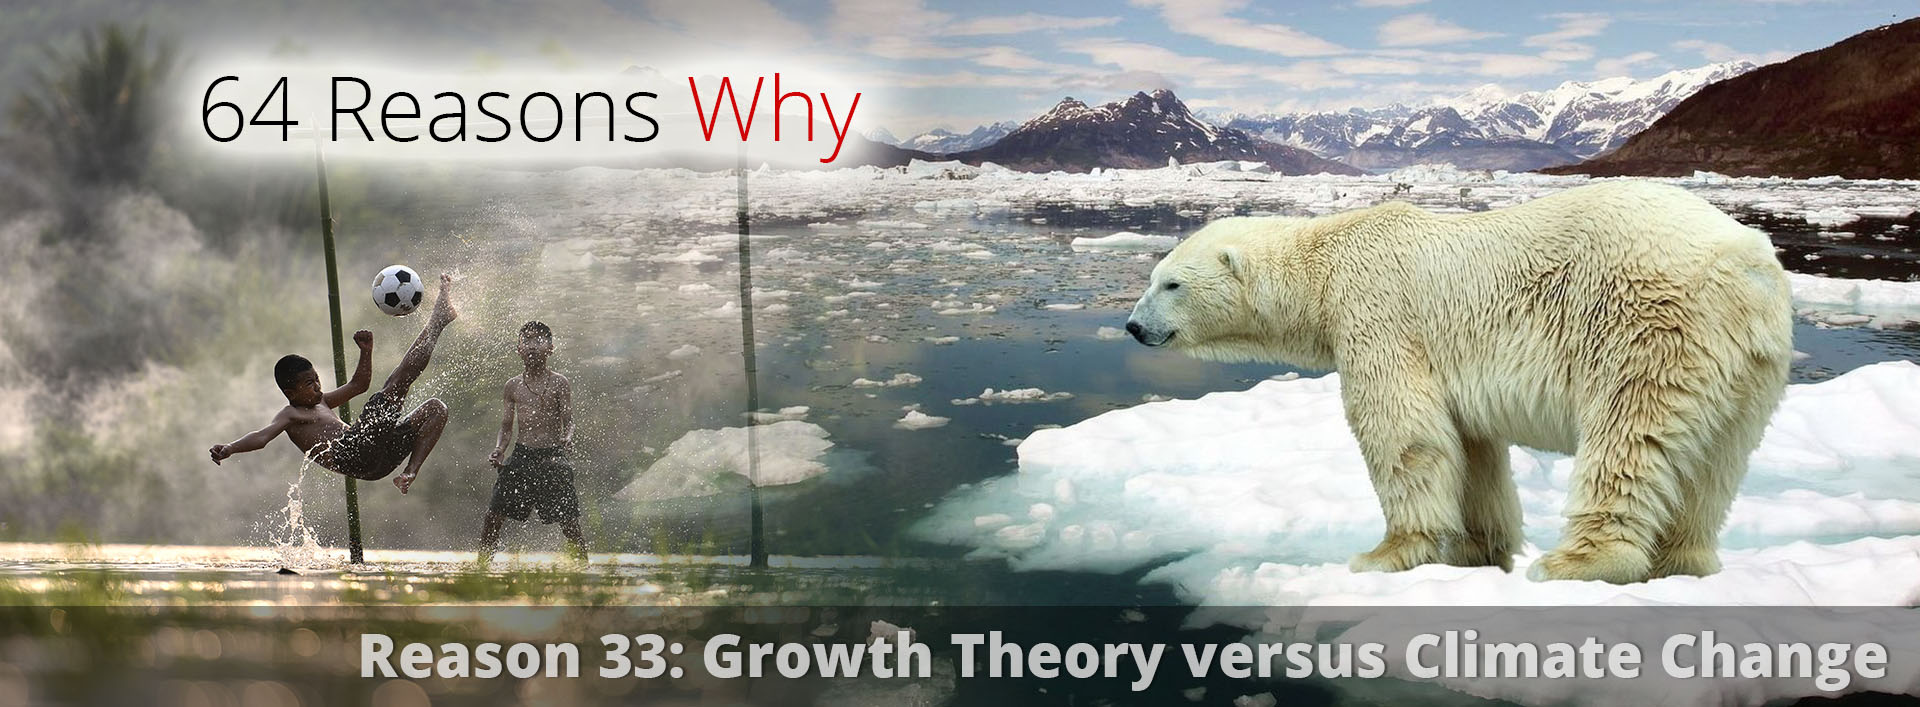 64-Reasons-Why__Reason-33__Growth-Theory-versus-Climate-Change